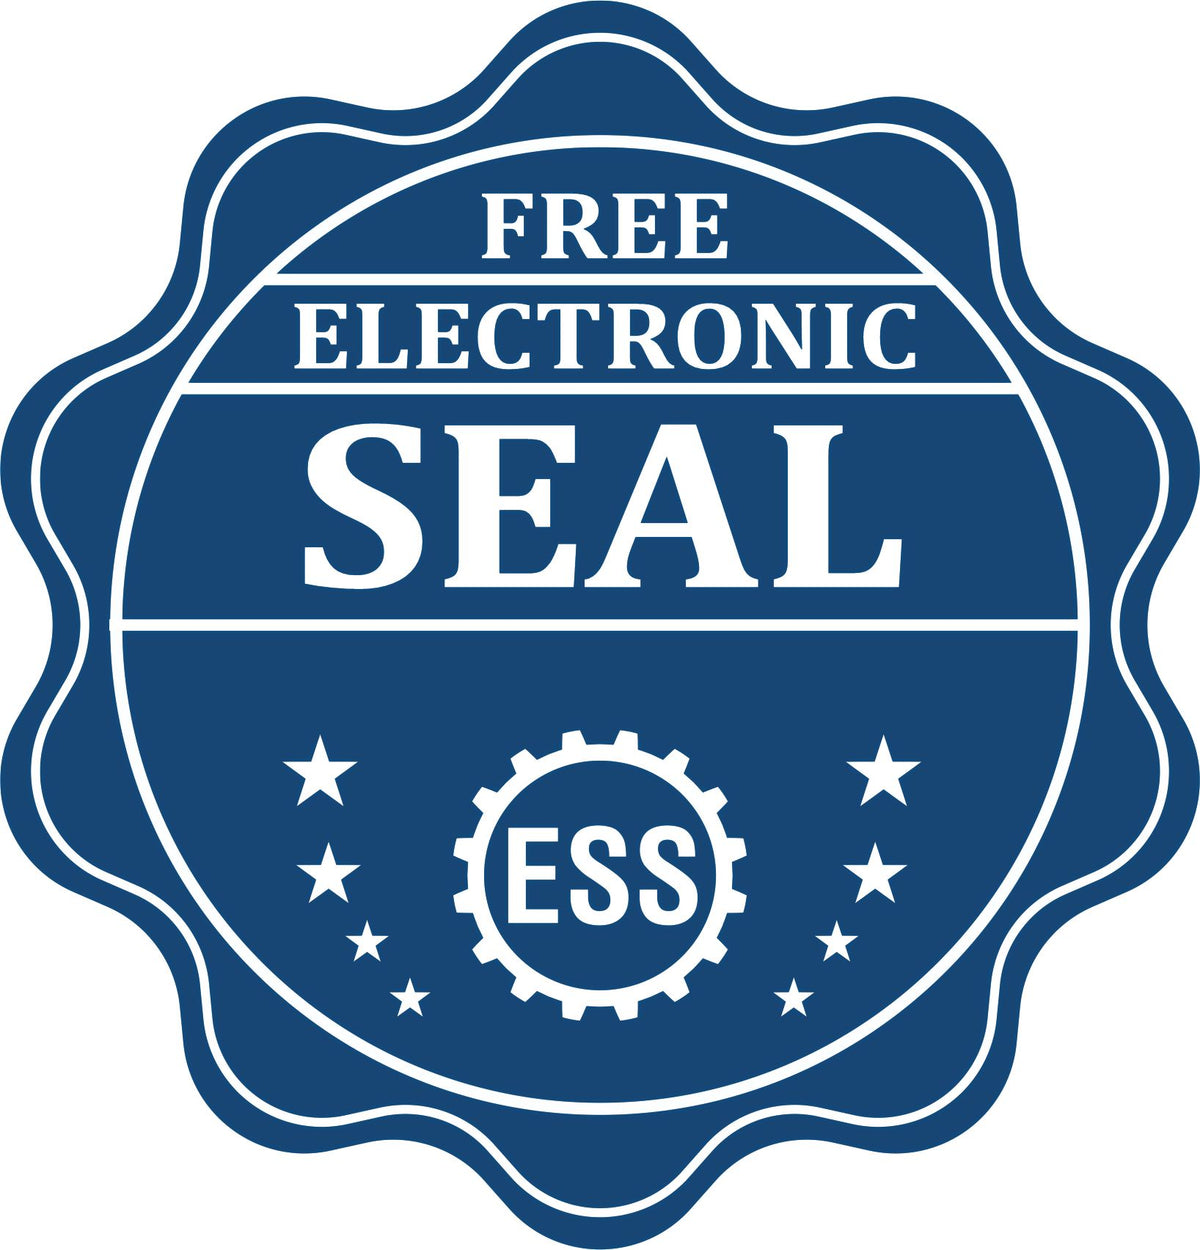 A badge showing a free electronic seal for the State of Kansas Soft Land Surveyor Embossing Seal with stars and the ESS gear on the emblem.